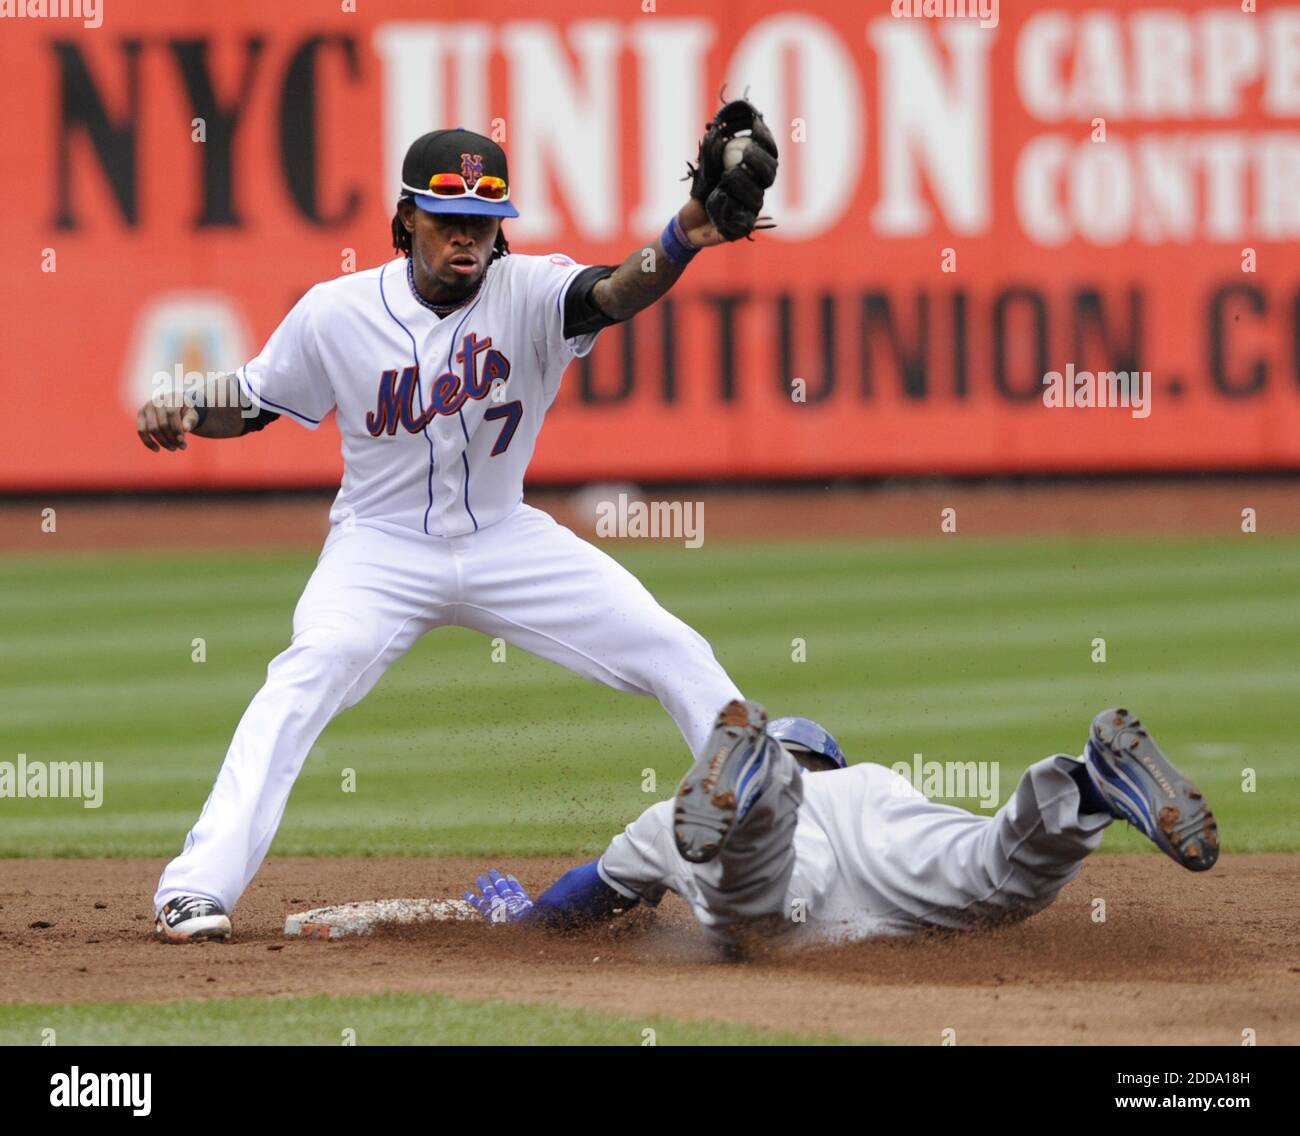 NO FILM, NO VIDEO, NO TV, NO DOCUMENTARY - Matt Kemp safely steals second base in the third inning as Jose Reyes of the New Yokr Mets couldn't make the tag in time at Citi Field in Flushing, NY, USA on April 28, 2010. The Mets defeated the Dodgers, 7-3. Photo by David Pokress/Newsday/MCT/Cameleon/ABACAPRESS.COM Stock Photo